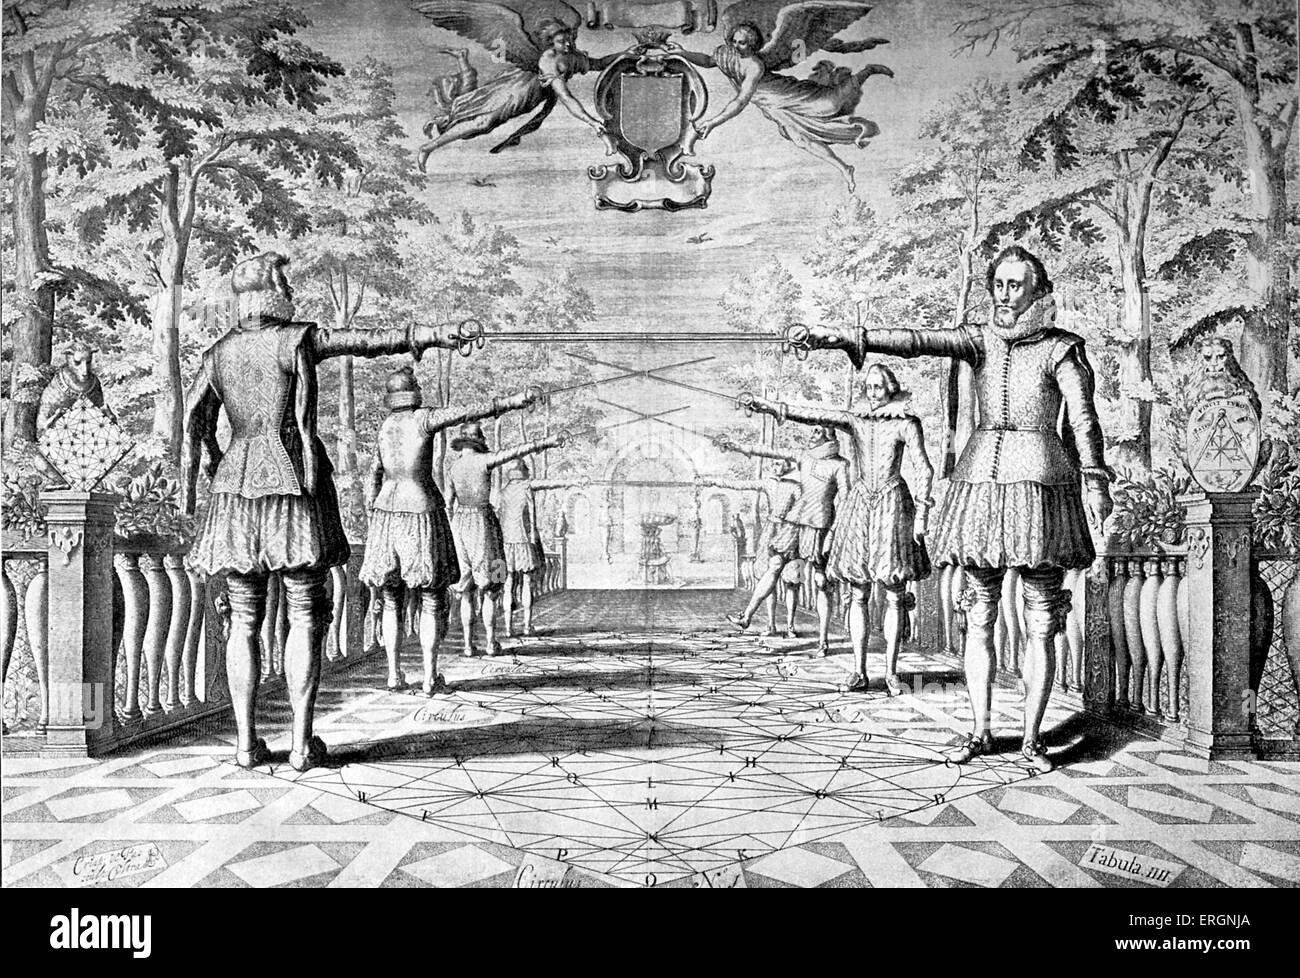 Engraving depicting the art of fencing from Academie de l'Espée (Academy of the Sword), 1628 rapier manual by Gérard Thibault Stock Photo